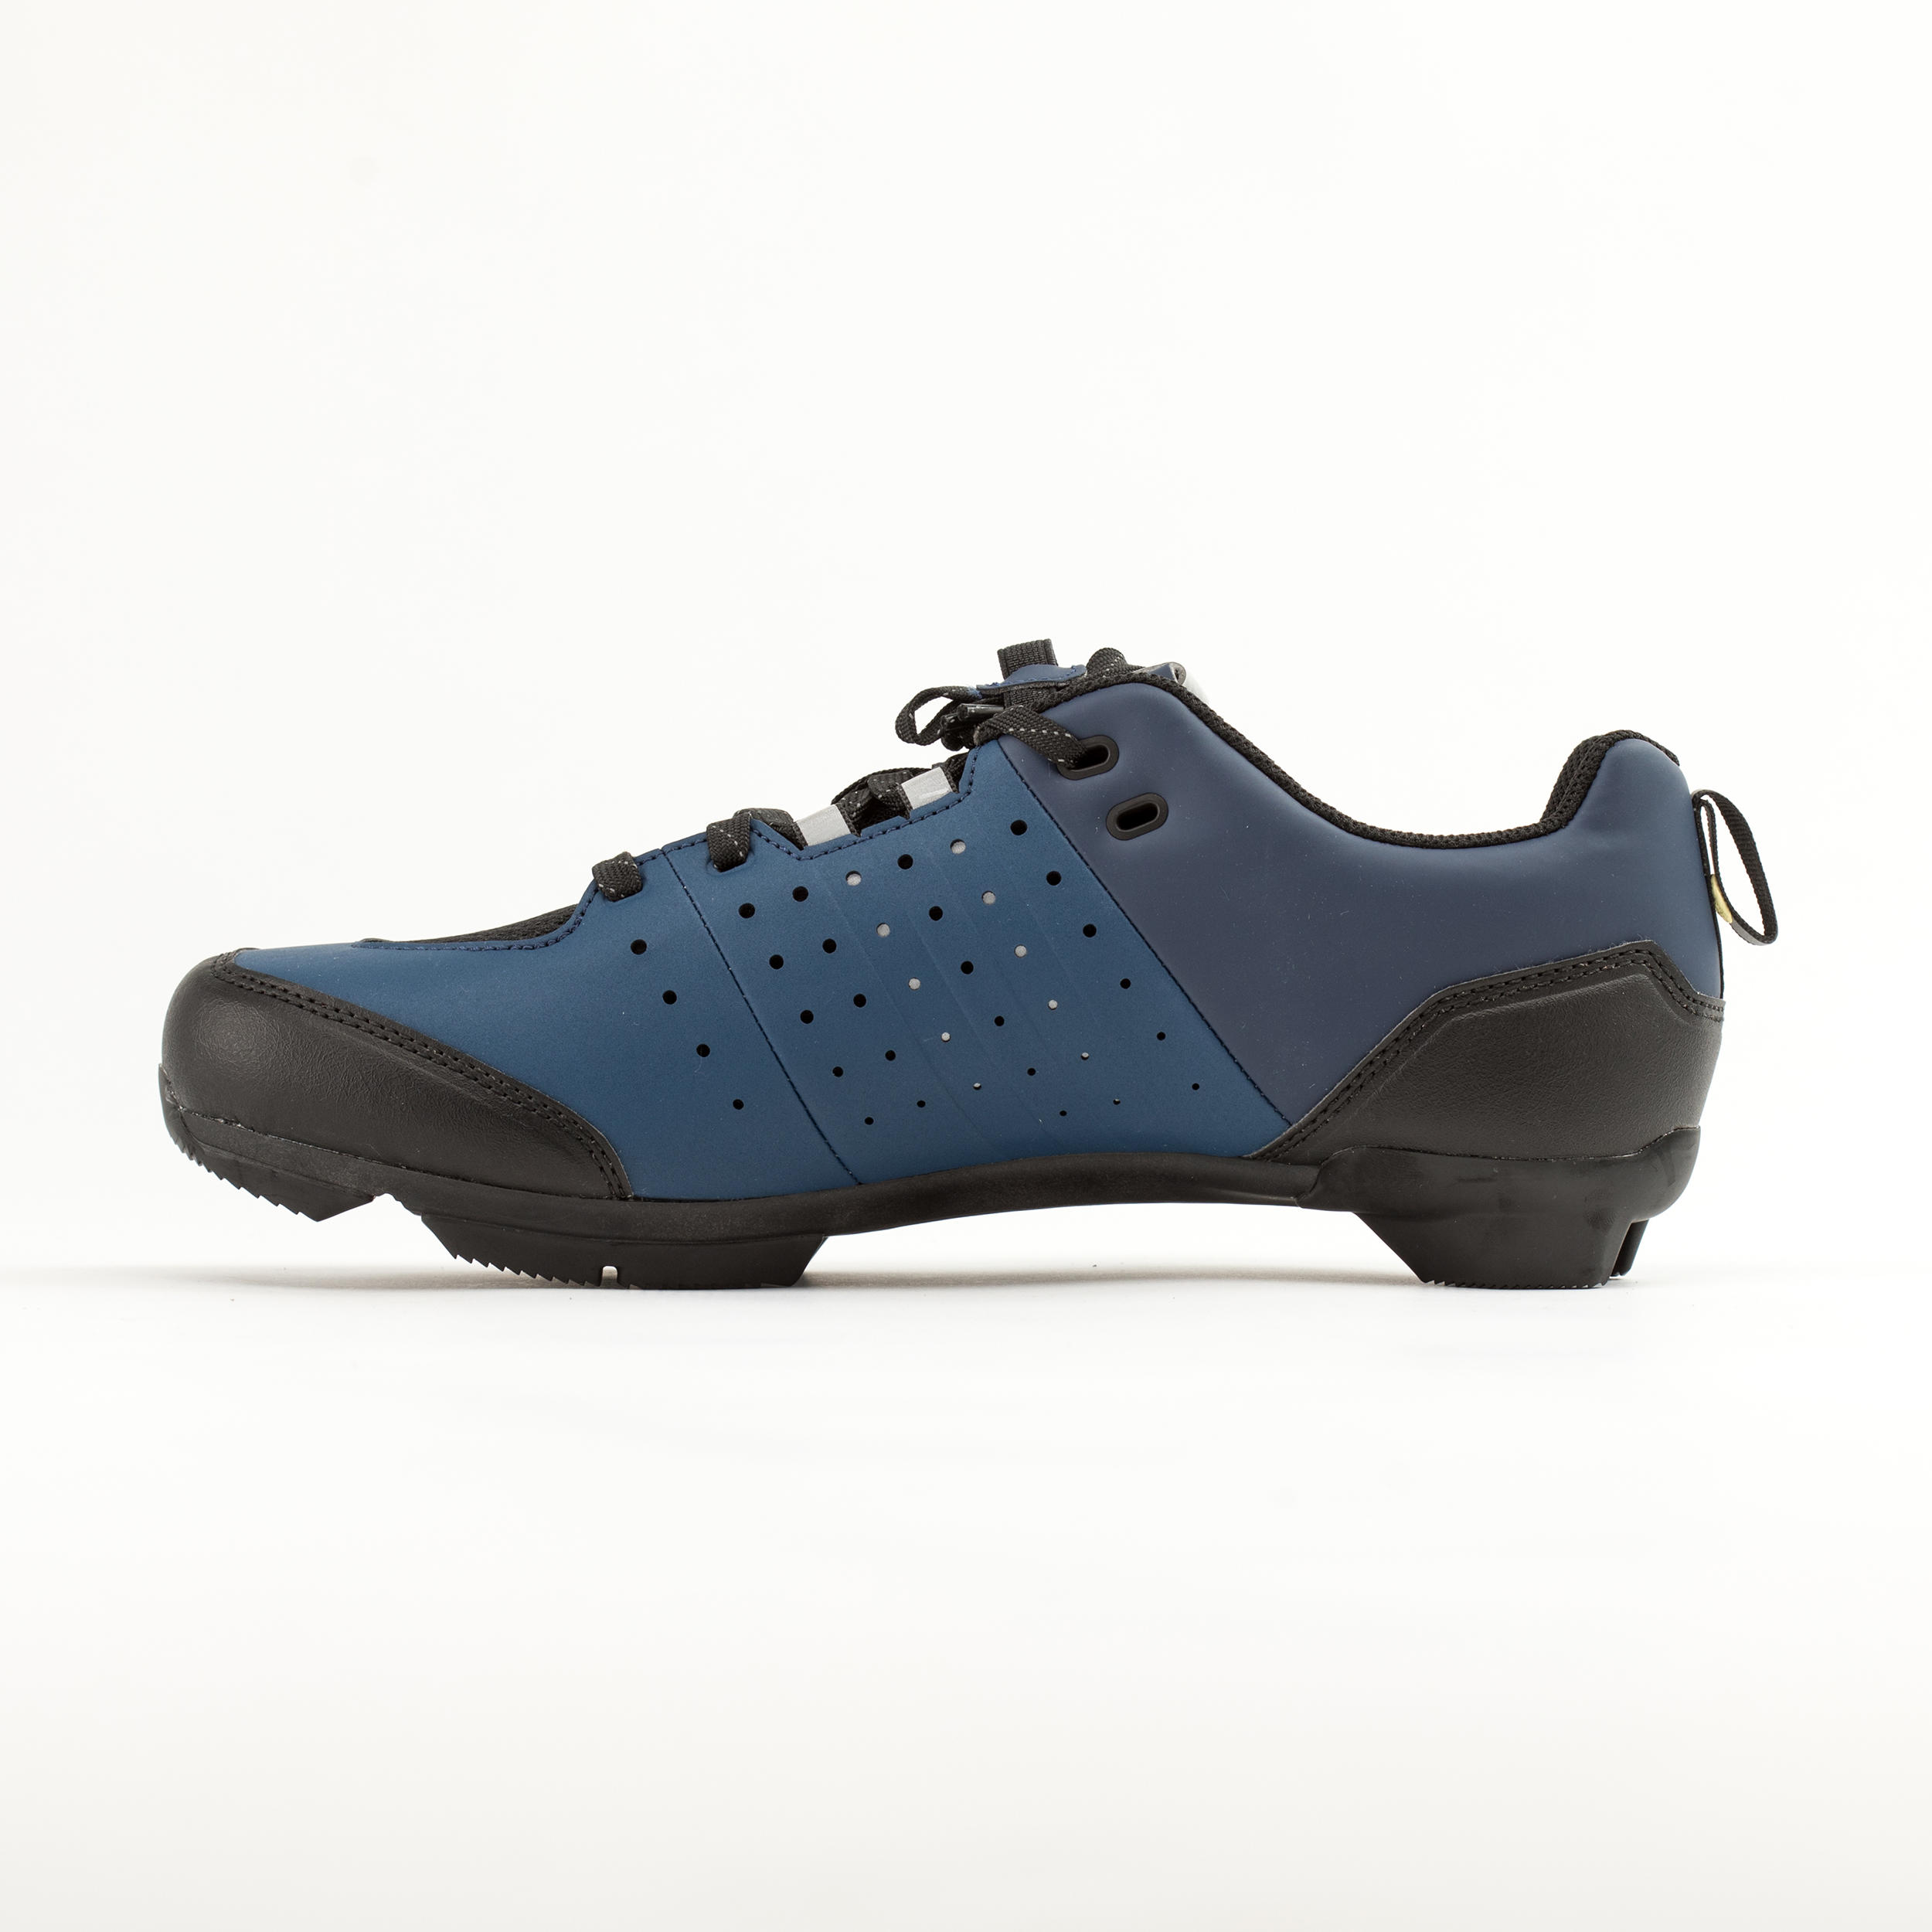 Road and Gravel Cycling Lace-Up SPD Shoes GRVL 500 - Blue / Navy 4/8